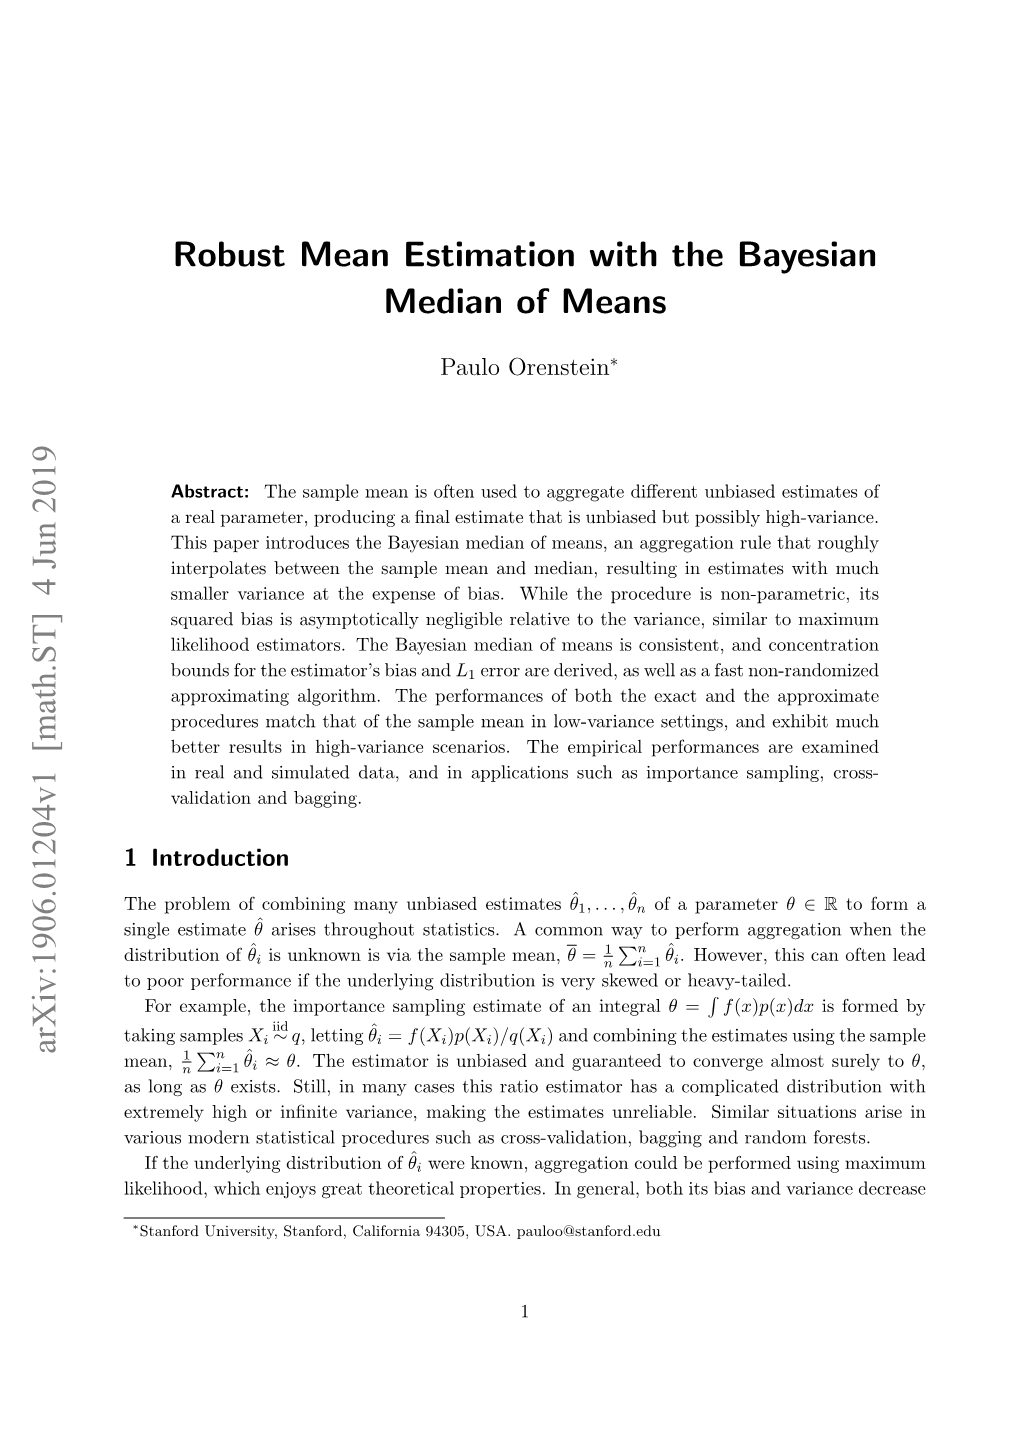 Robust Mean Estimation with the Bayesian Median of Means